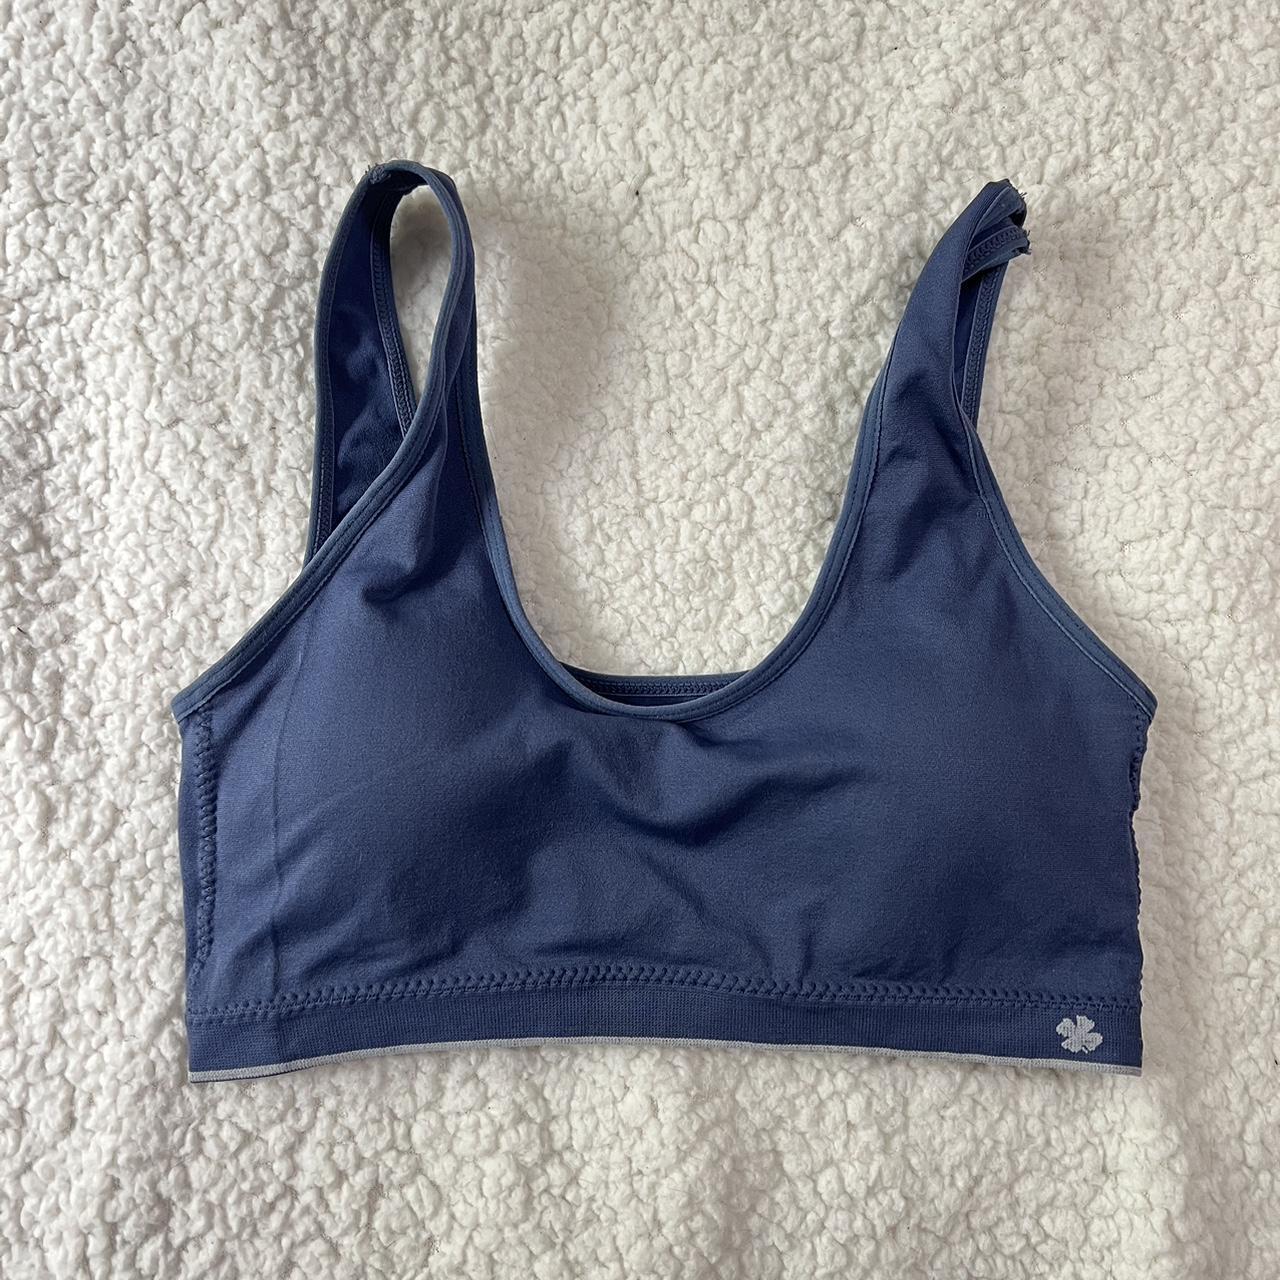 Lucky brand teal sports bra / bralette with blue and - Depop